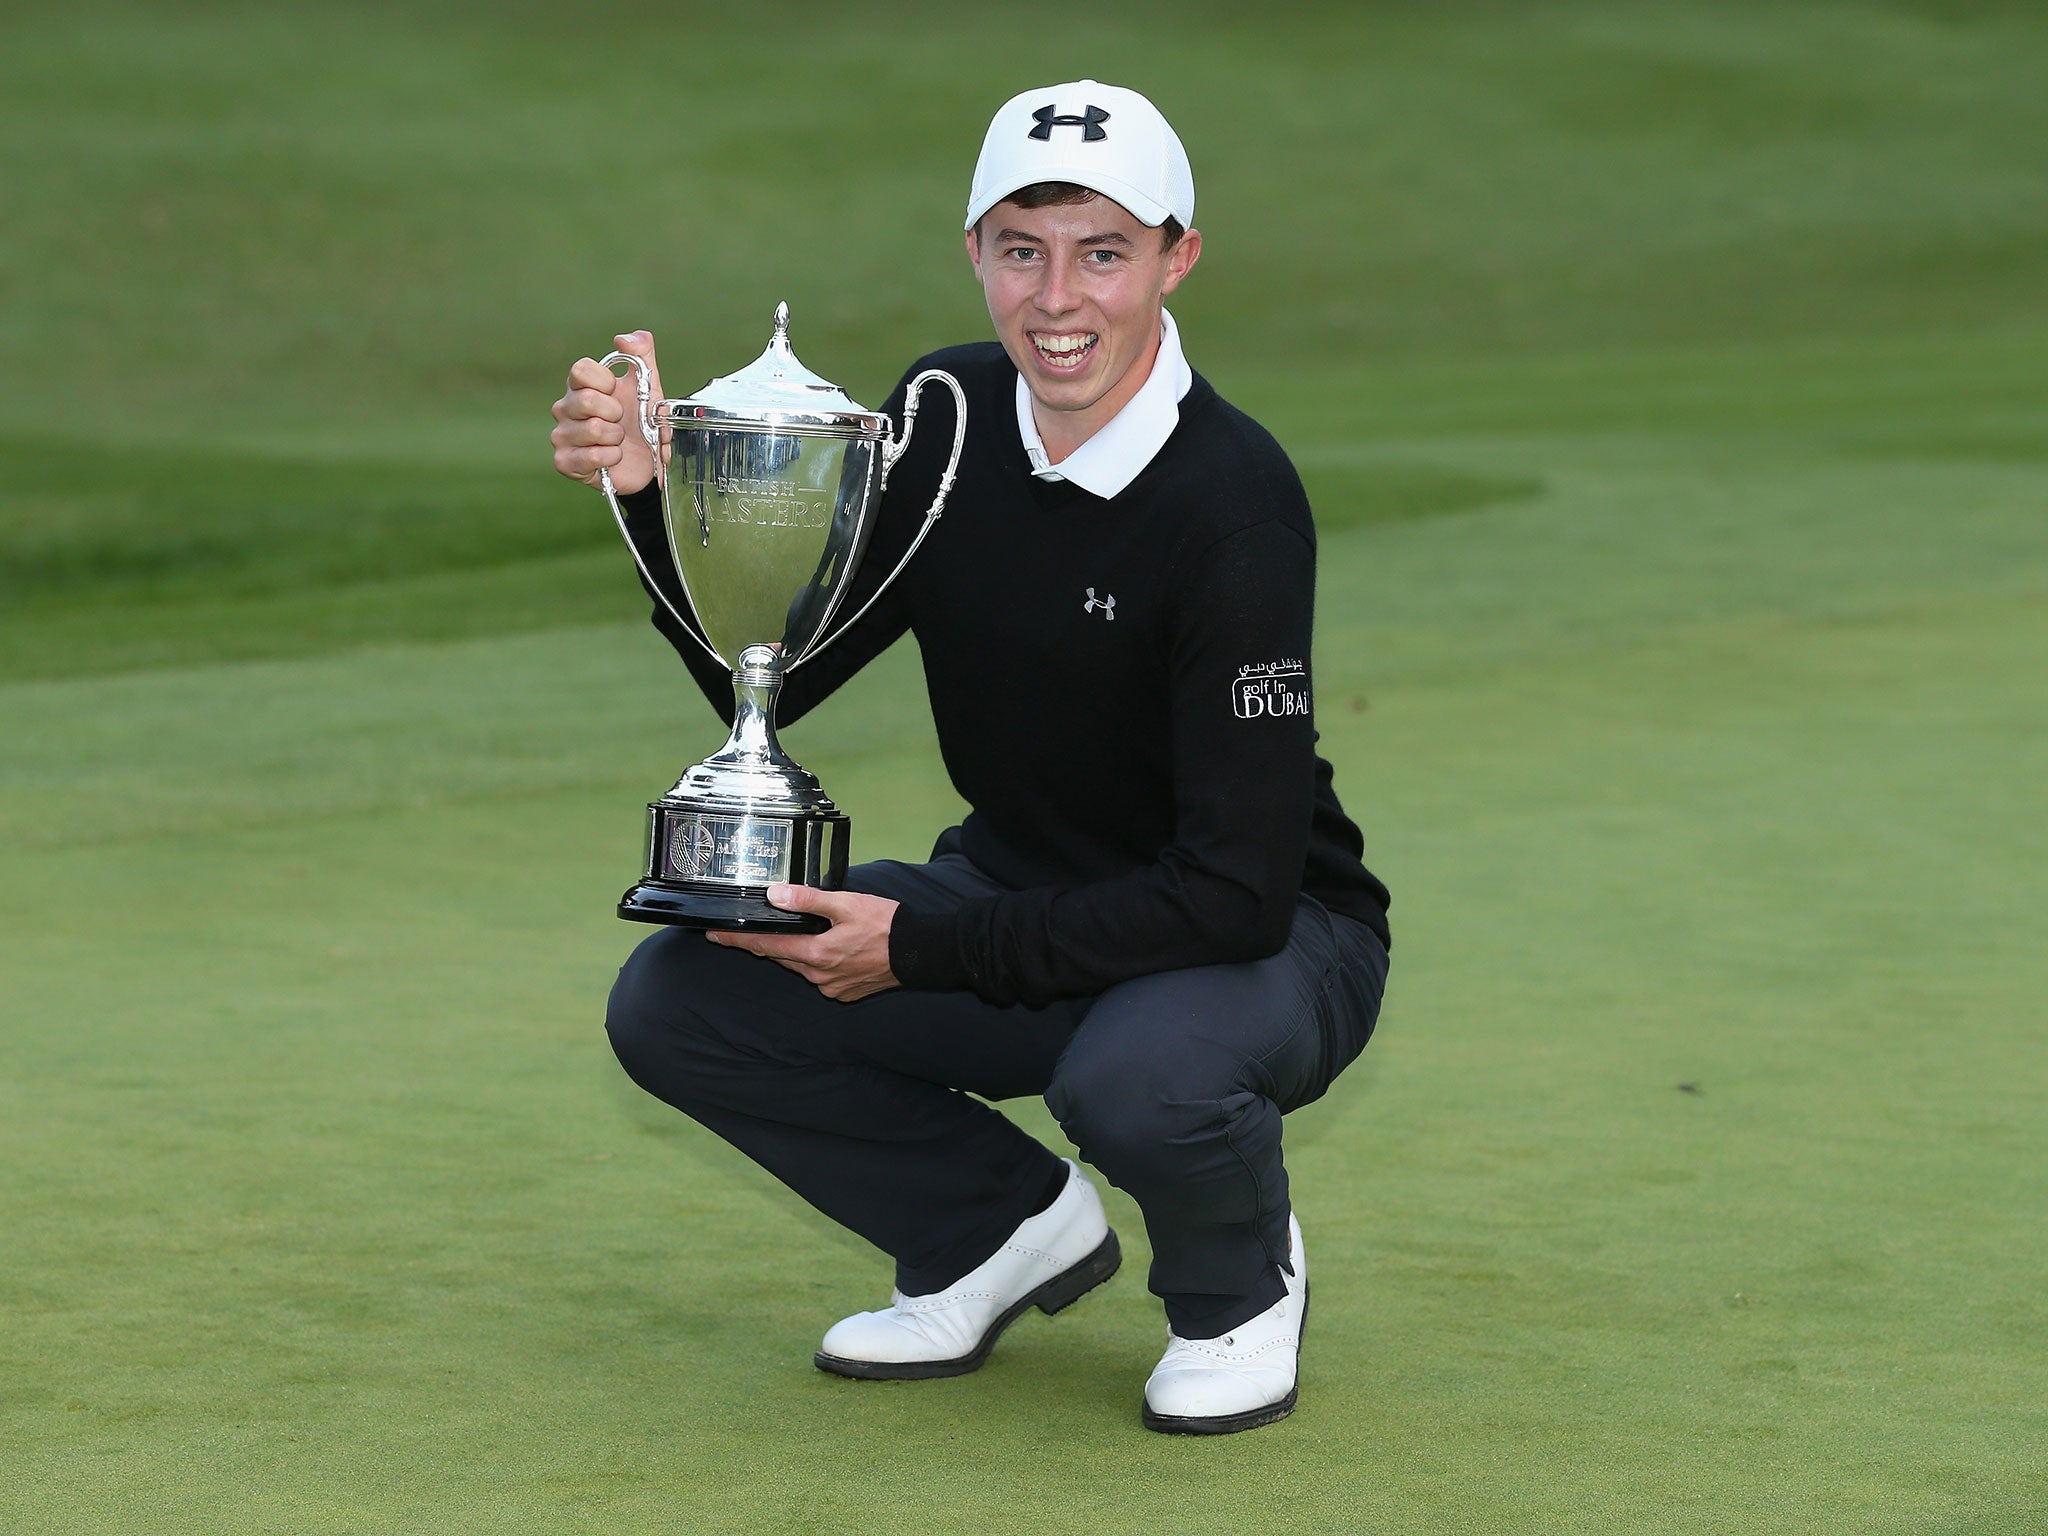 Matthew Fitzpatrick with the trophy after his British Masters victory